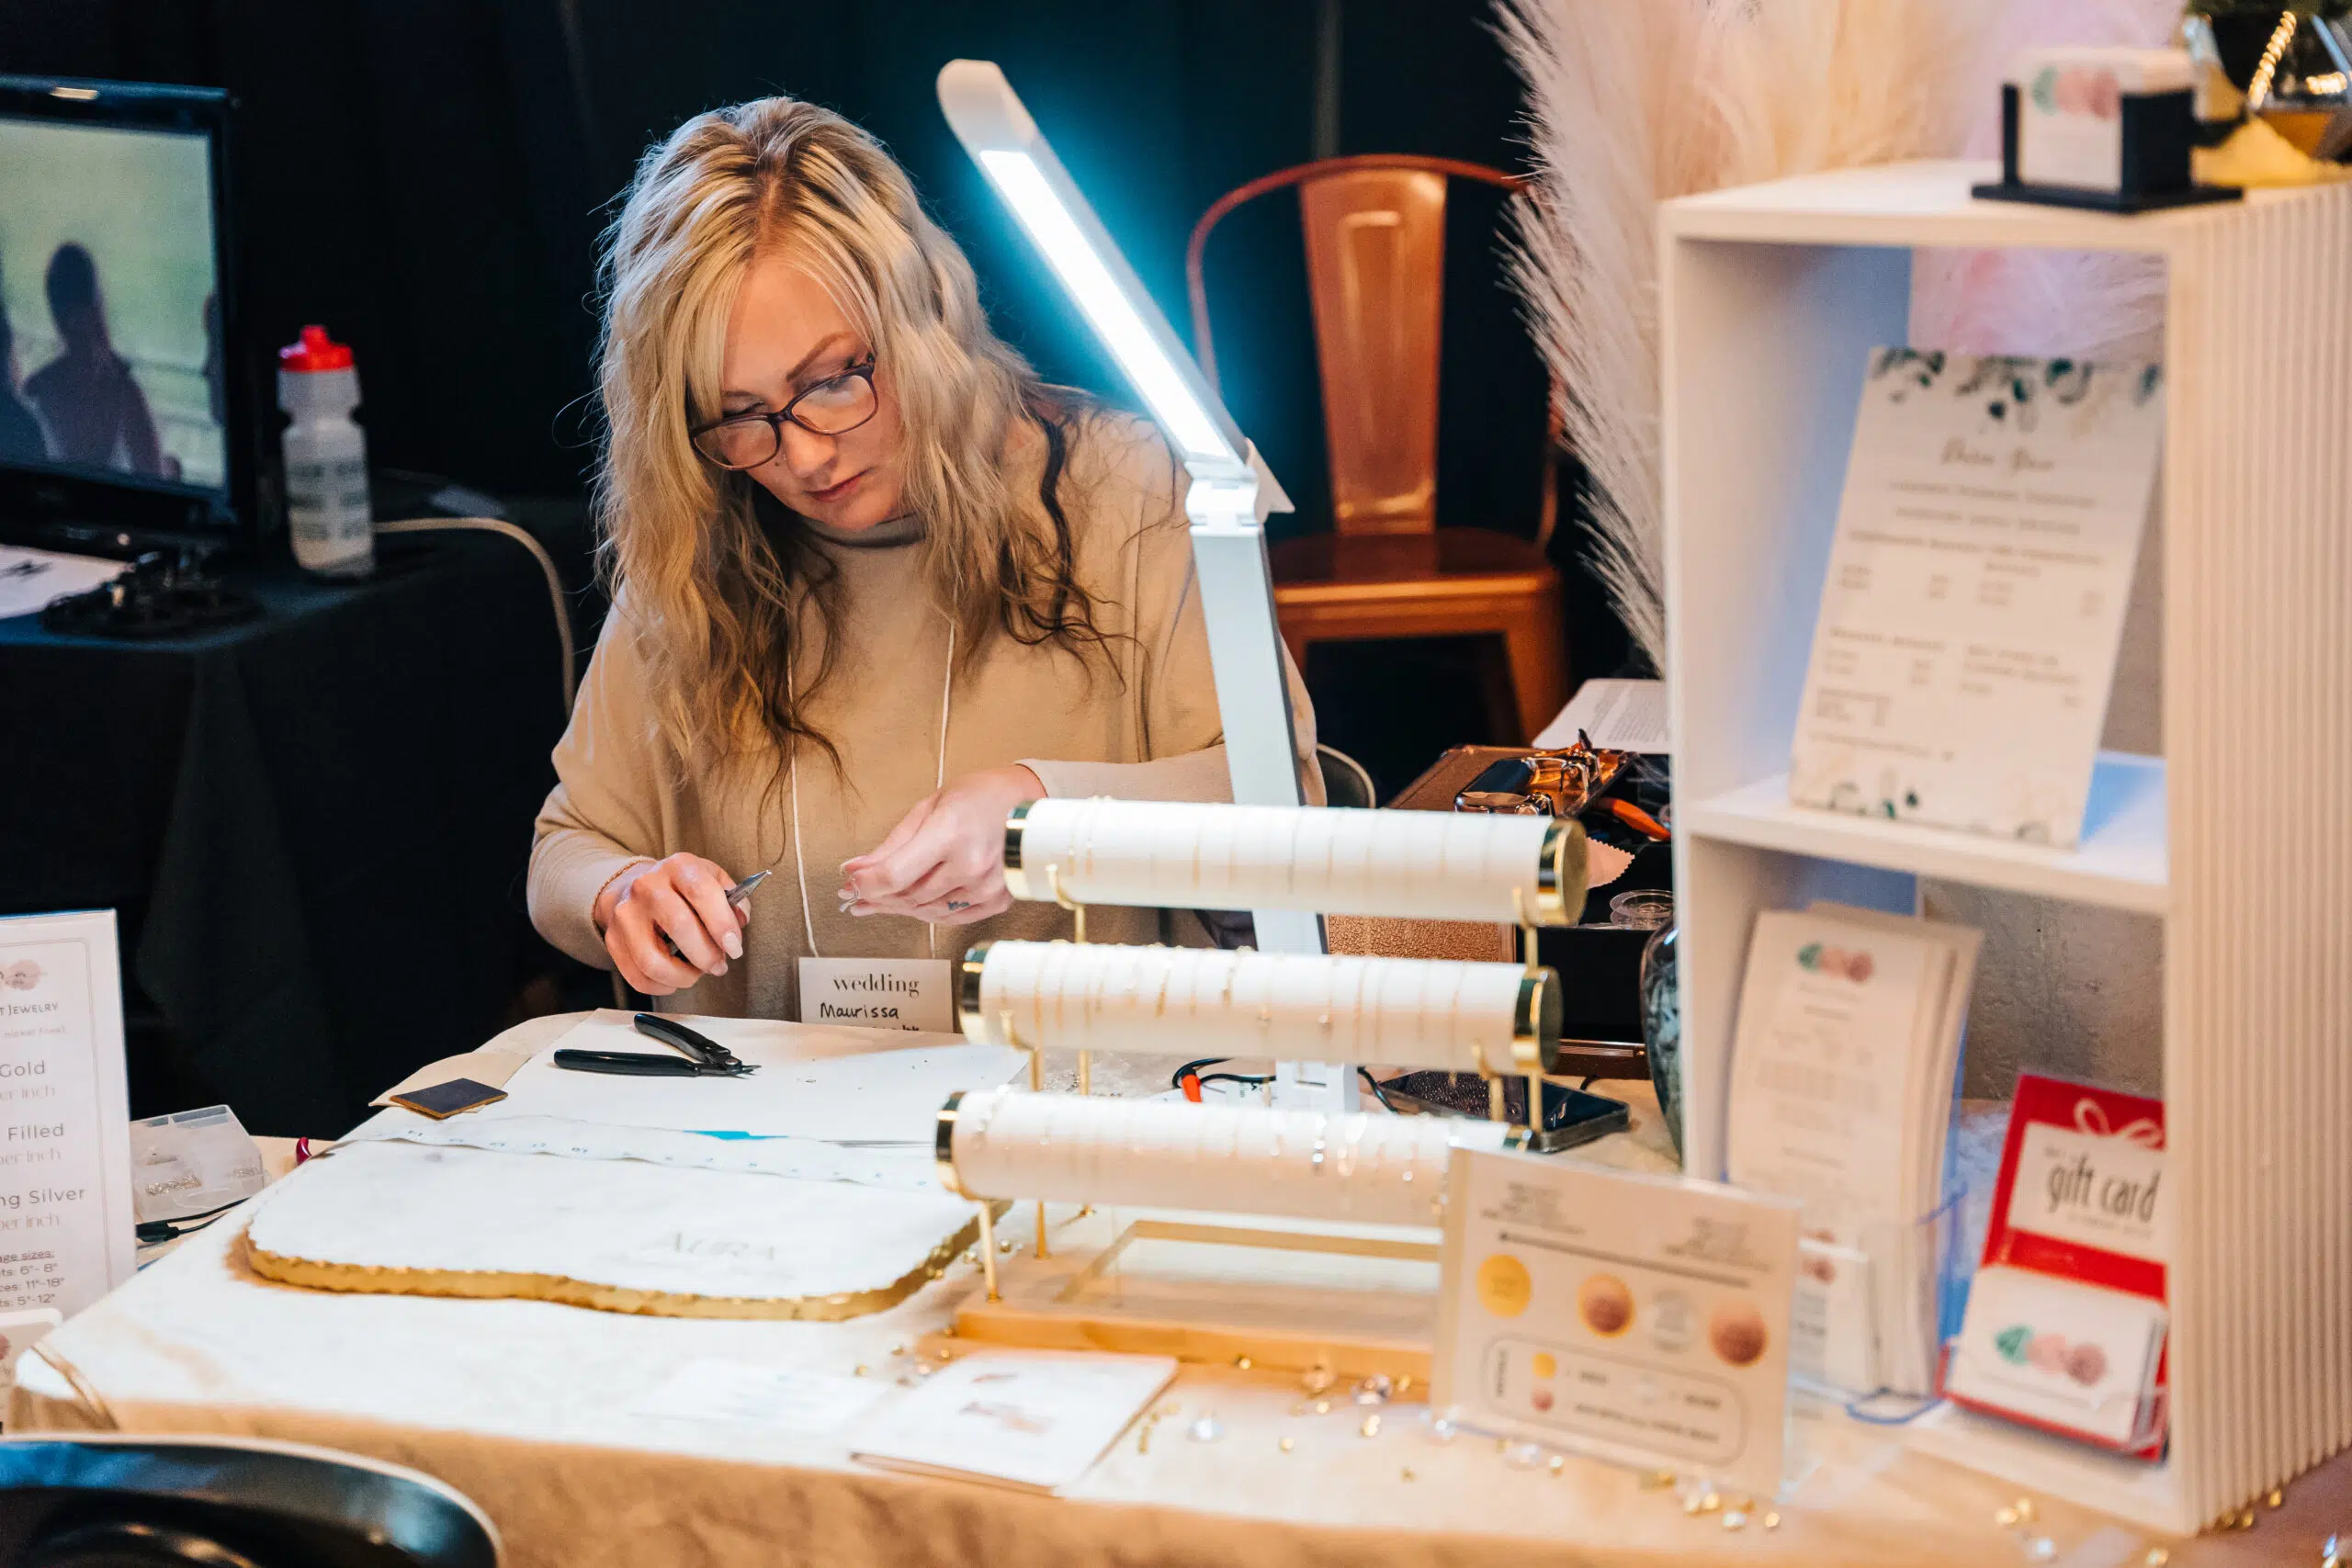 Wedding Vendors Making Jewleryy - Make The Most Out Of A Wedding Fair